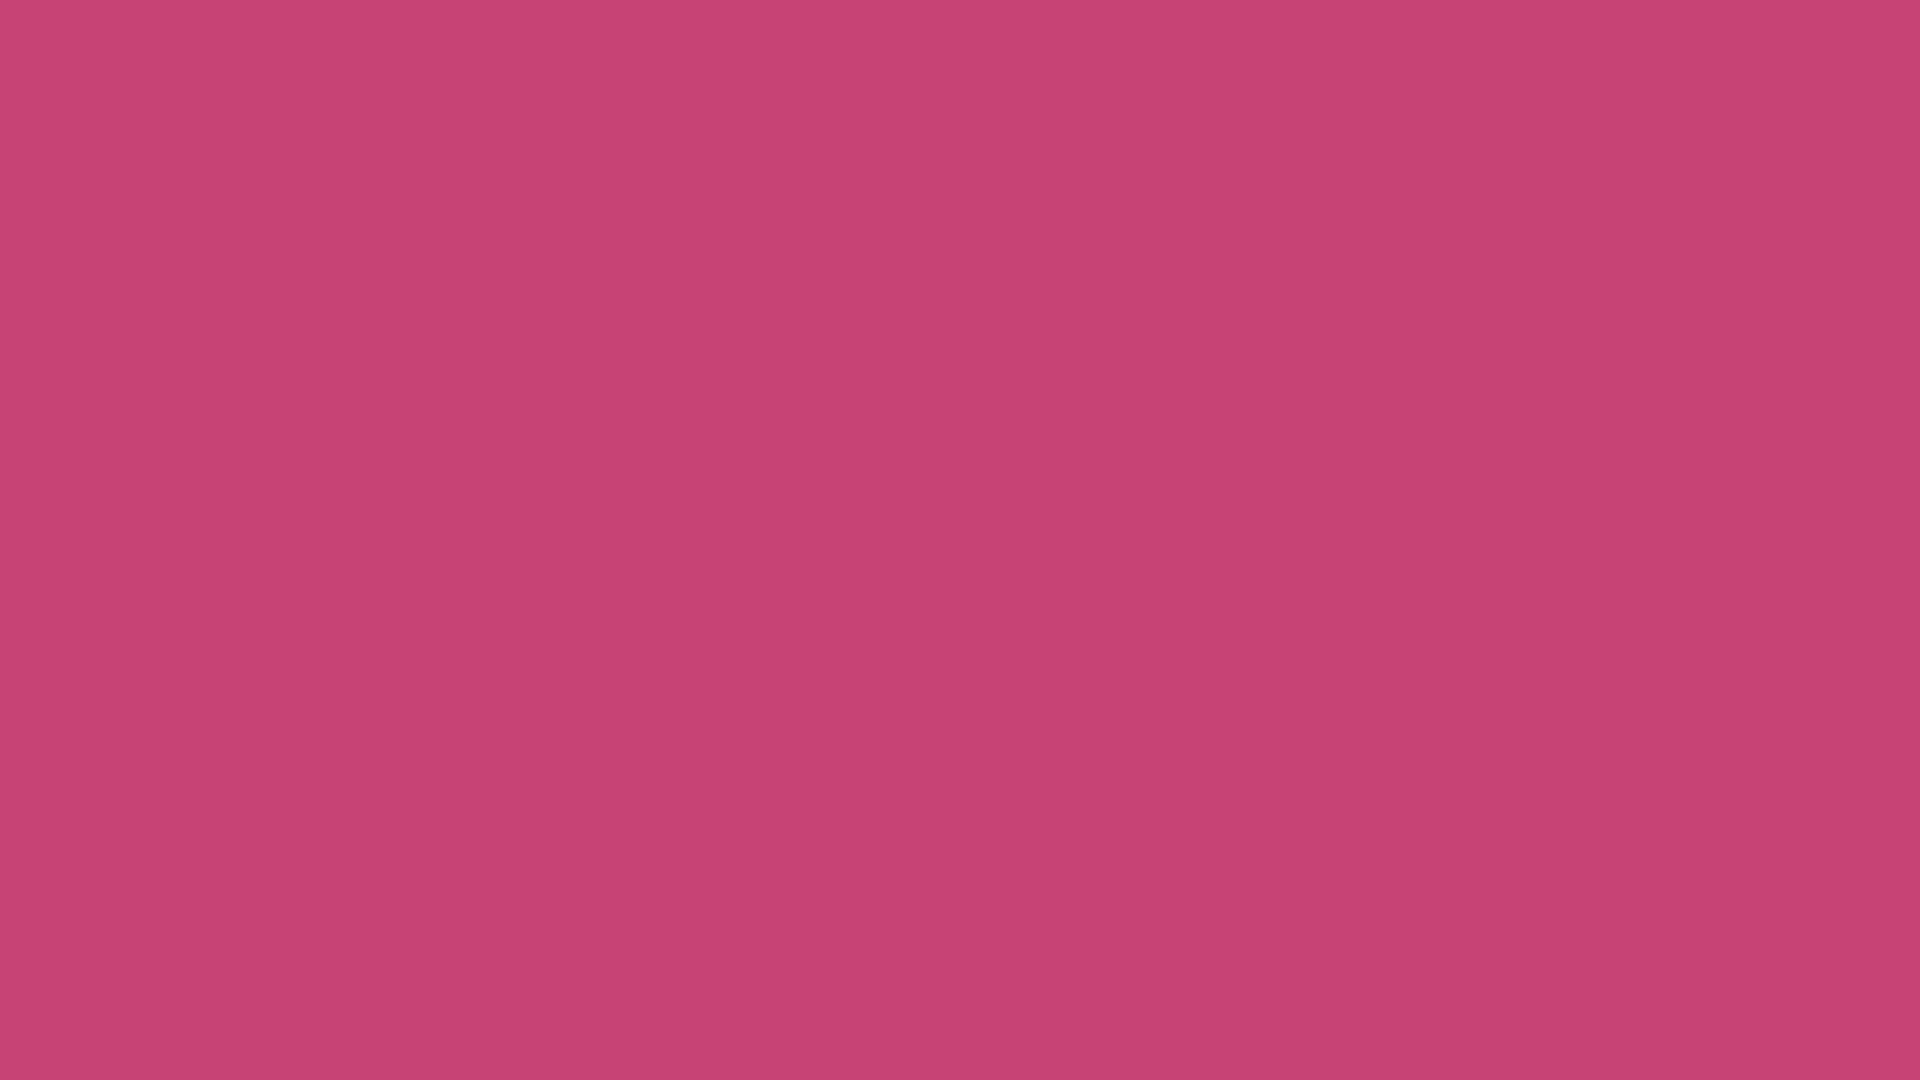 1920x1080 Fuchsia Rose Solid Color Background